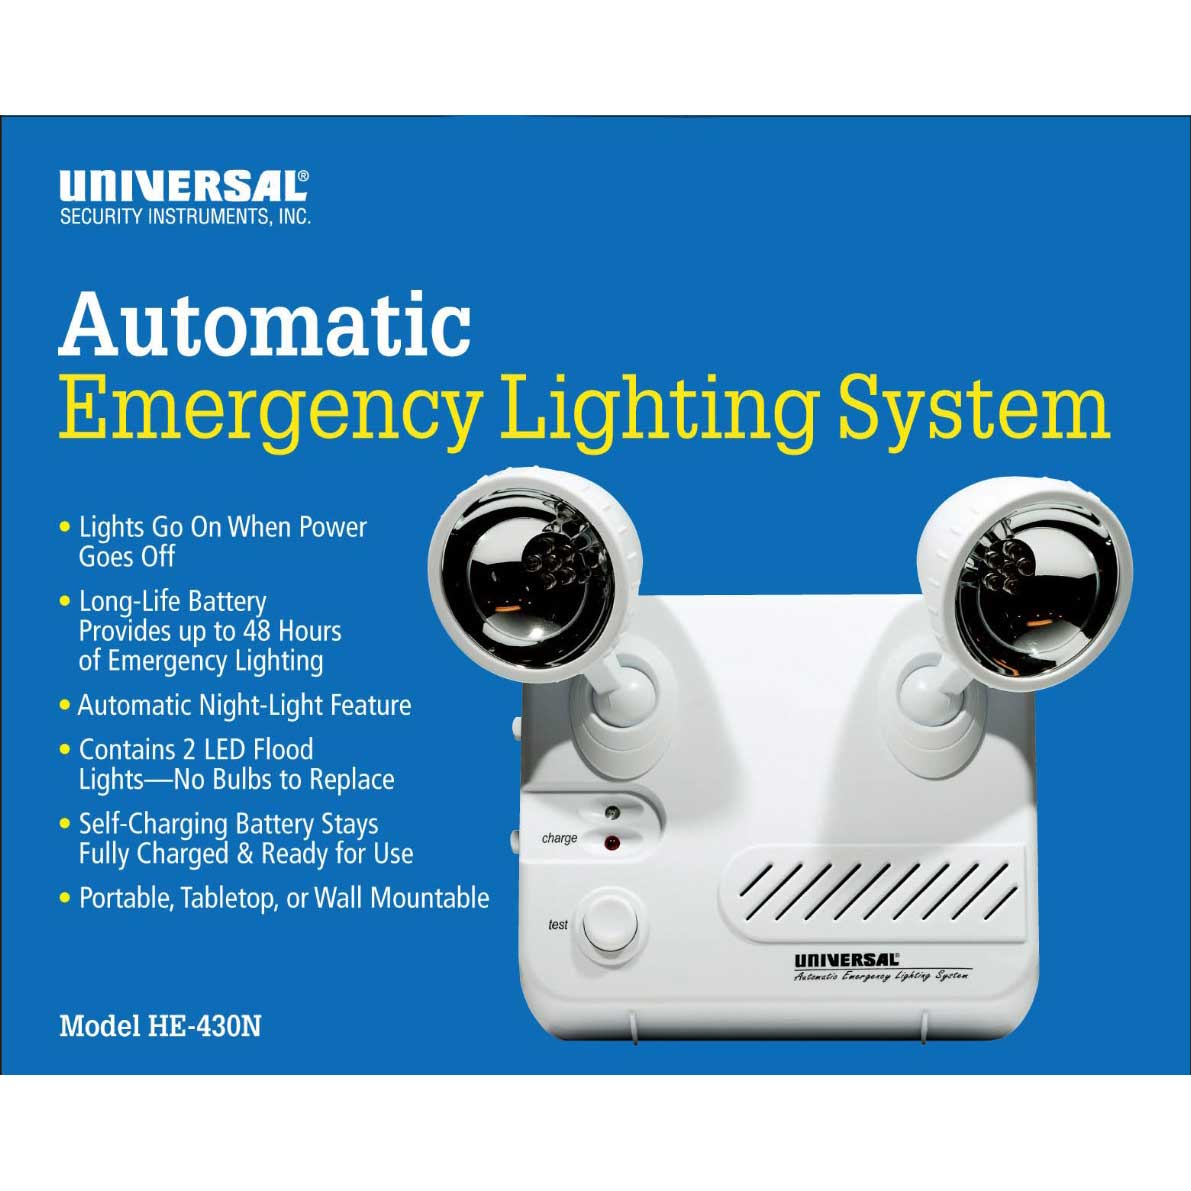 USI - HE-430N Automatic Emergency Lighting System